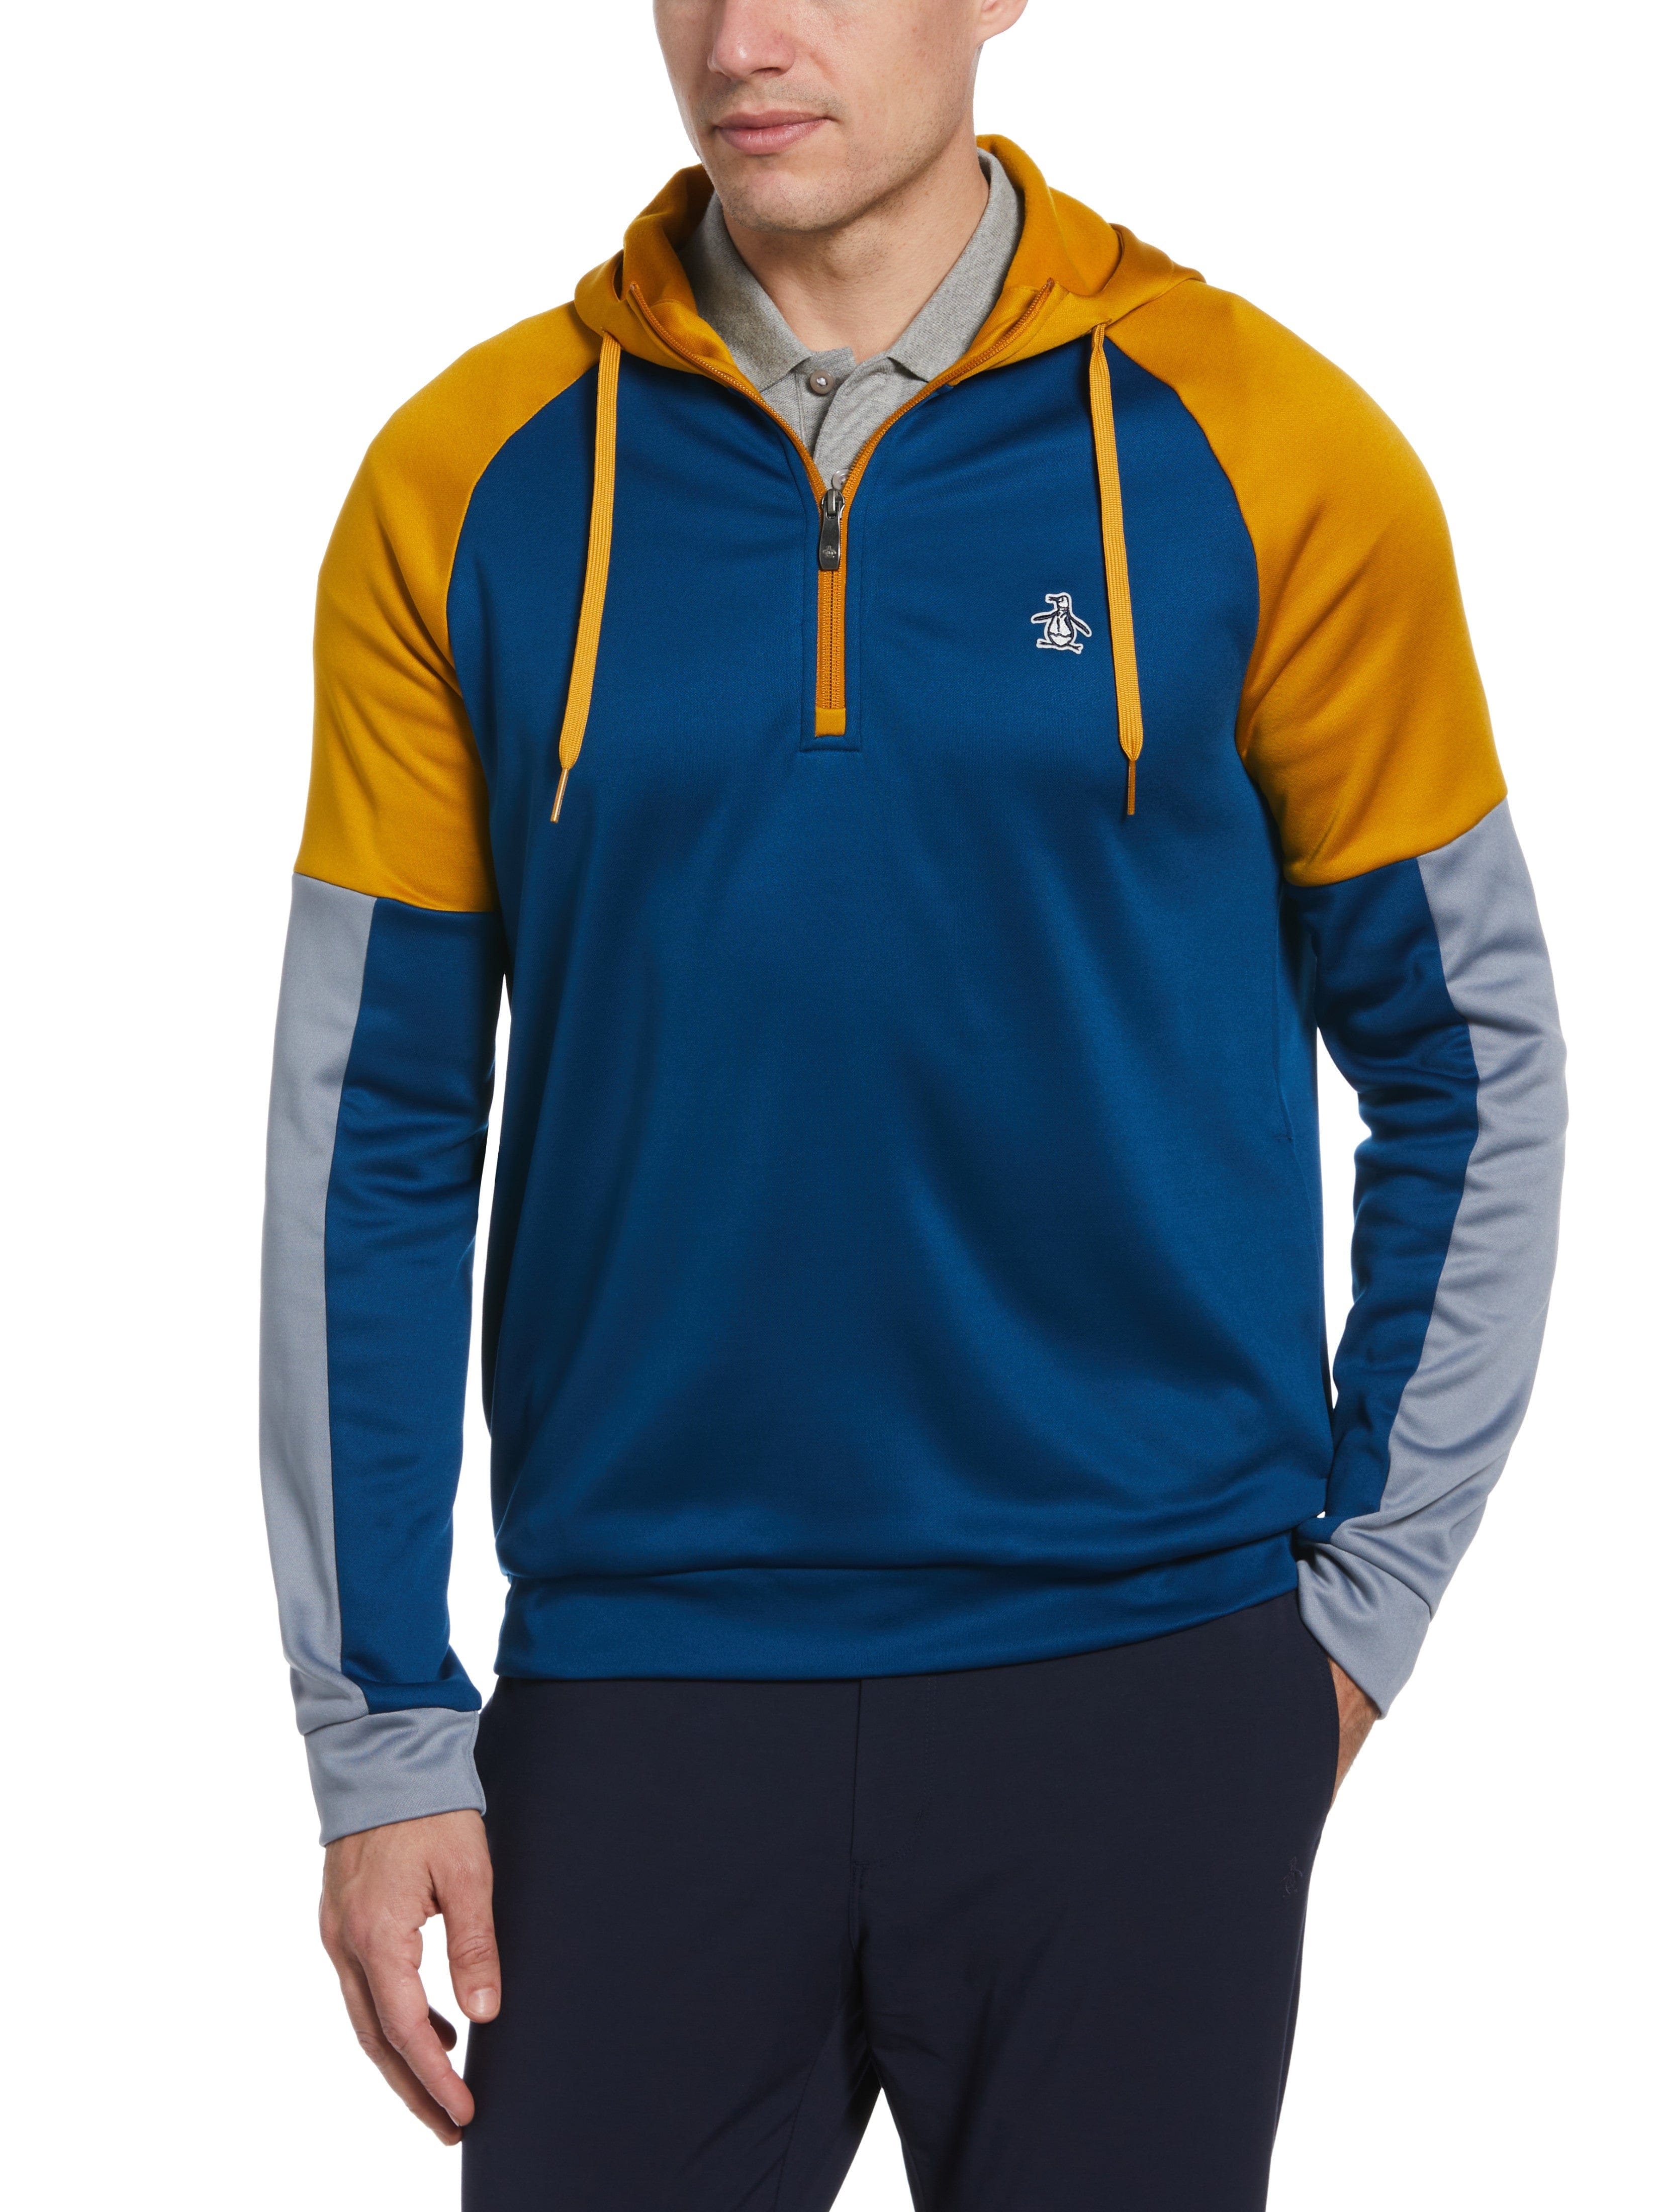 Original Penguin Mens Crossover Hoodie Pullover Top, Size Large, Blueberry Pancake, 100% Polyester | Golf Apparel Shop